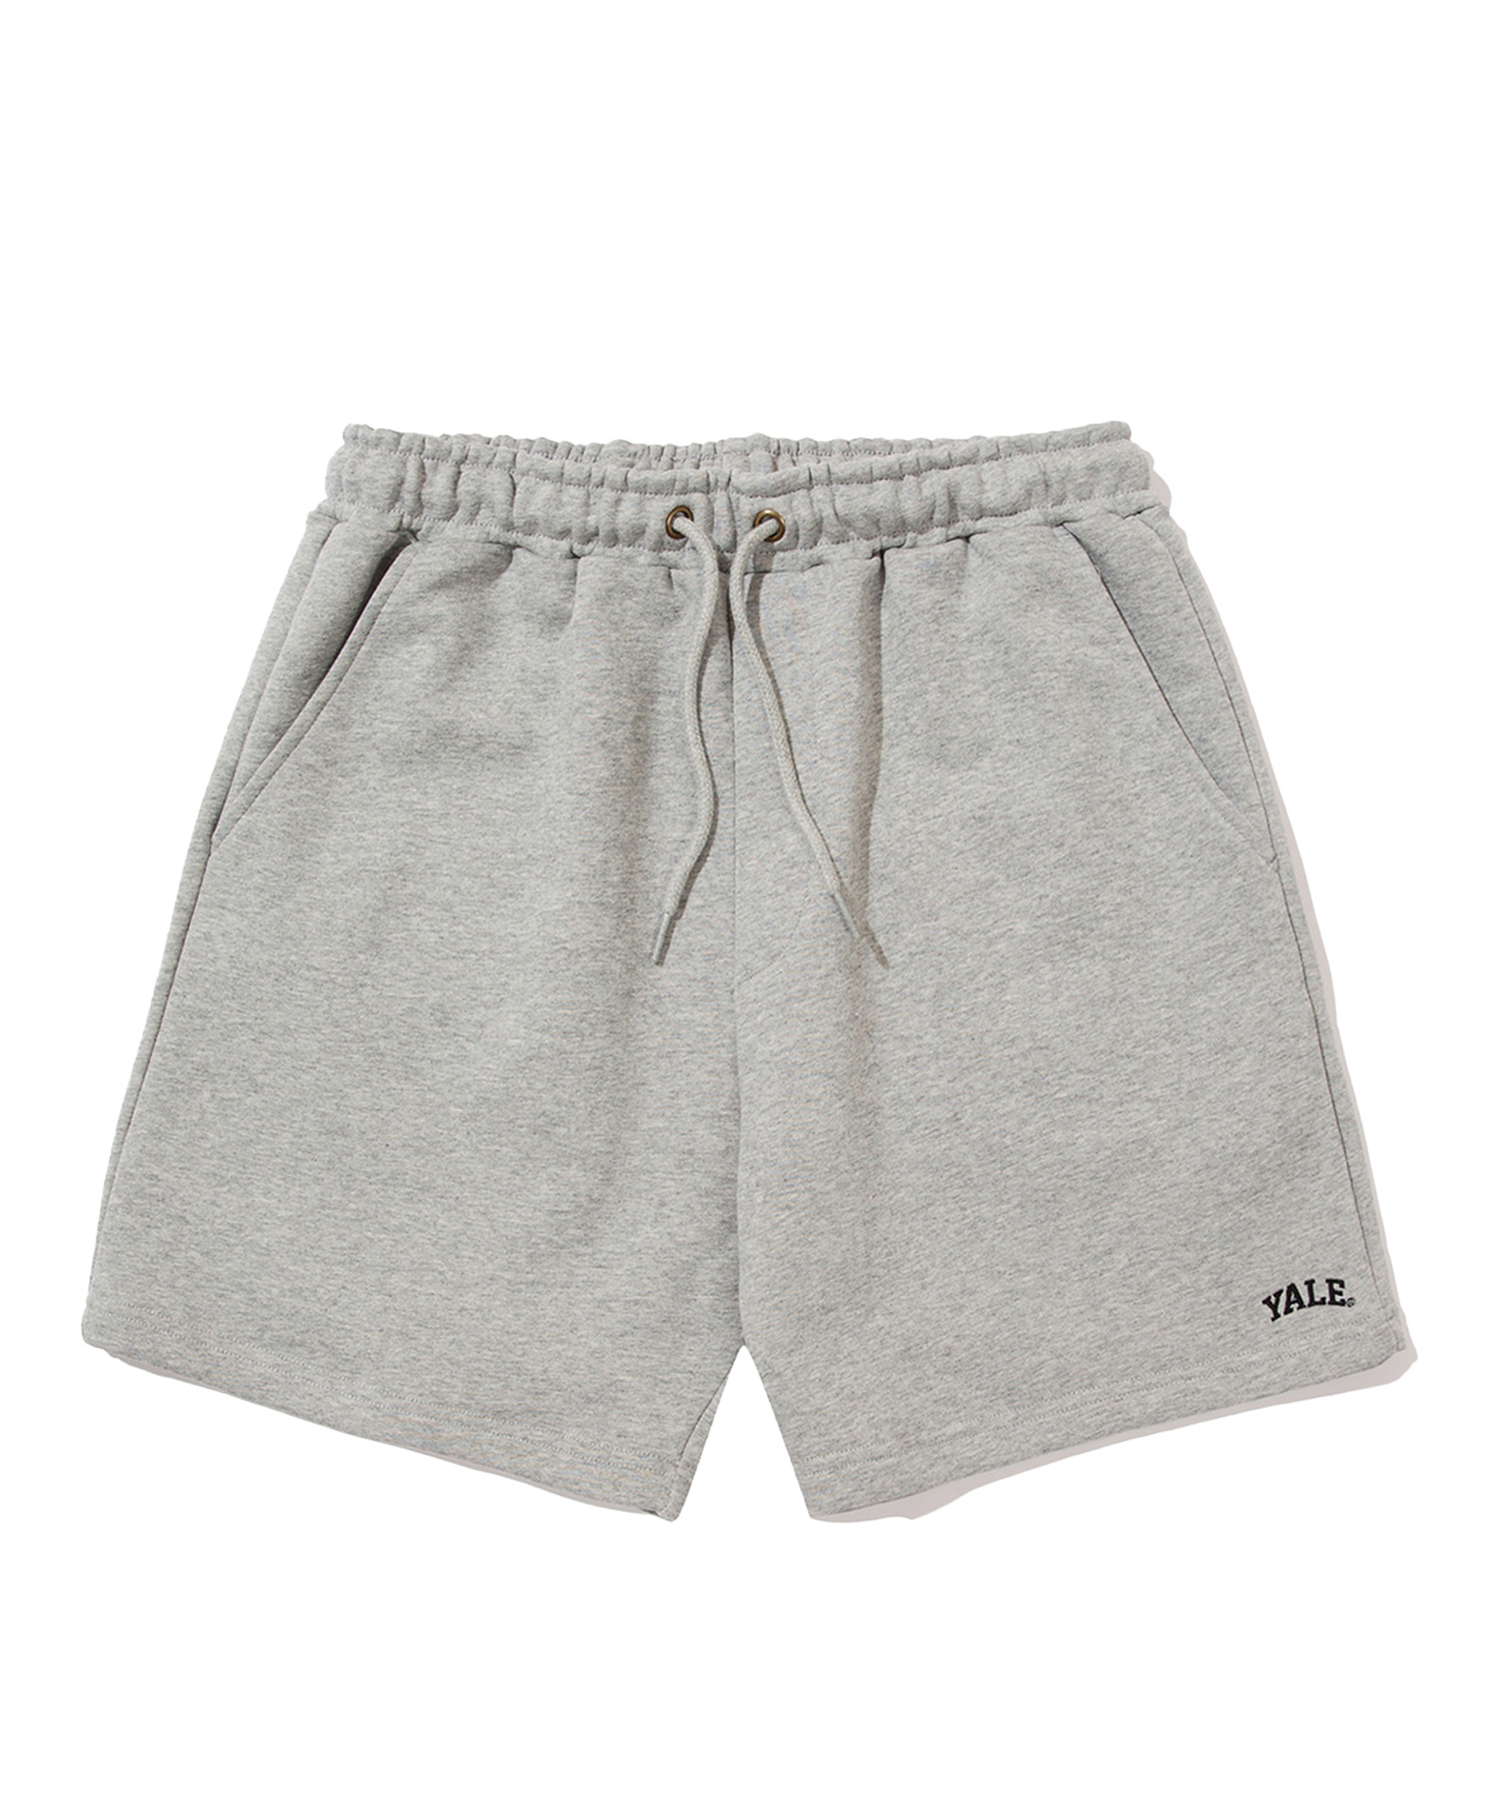 [ONEMILE WEAR] SMALL ARCH SWEAT SHORTS GRAY